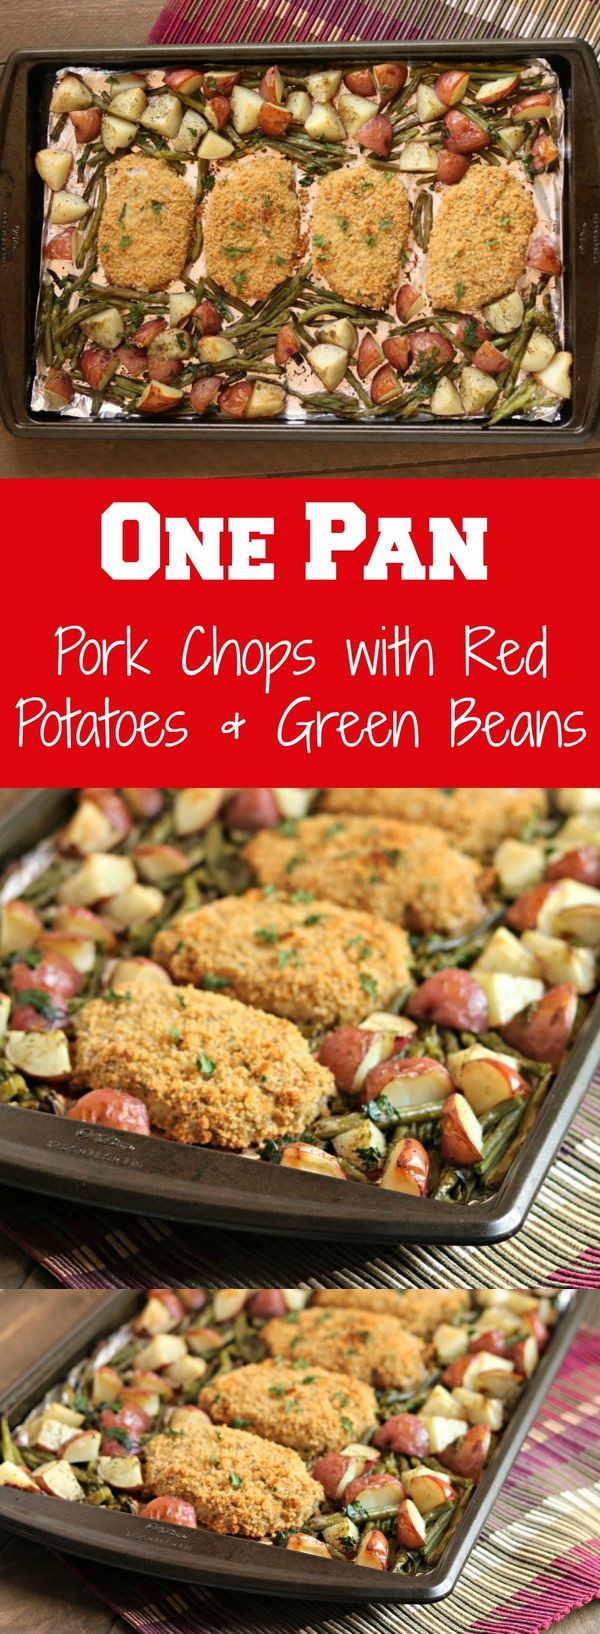 One Pan Pork Chops with Red Potatoes & Green Beans